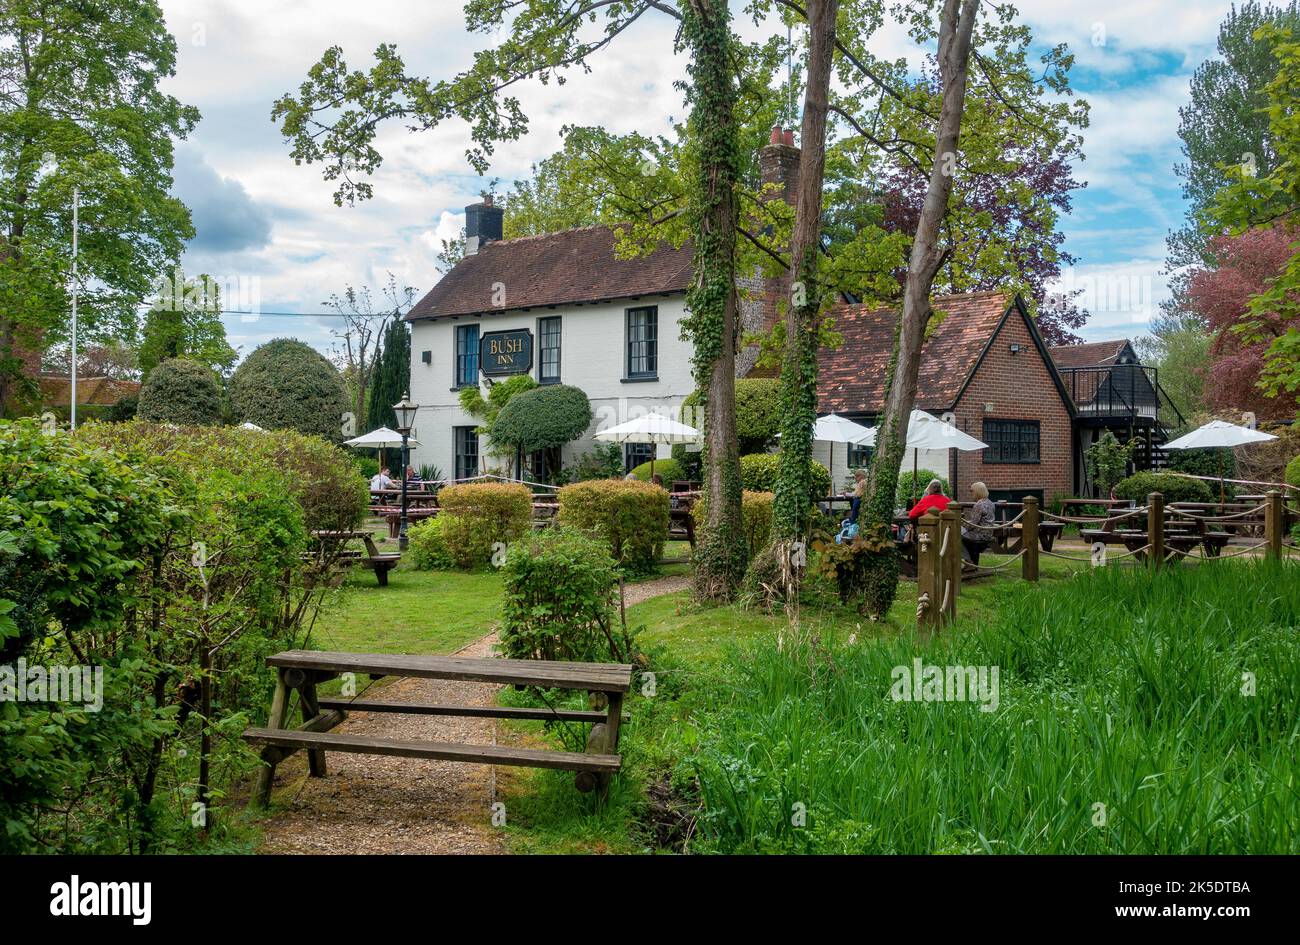 The Bush Inn pub nestled in the South Downs National Park, beside the river Itchen in Ovington near New Alresford in Hampshire, England, UK Stock Photo